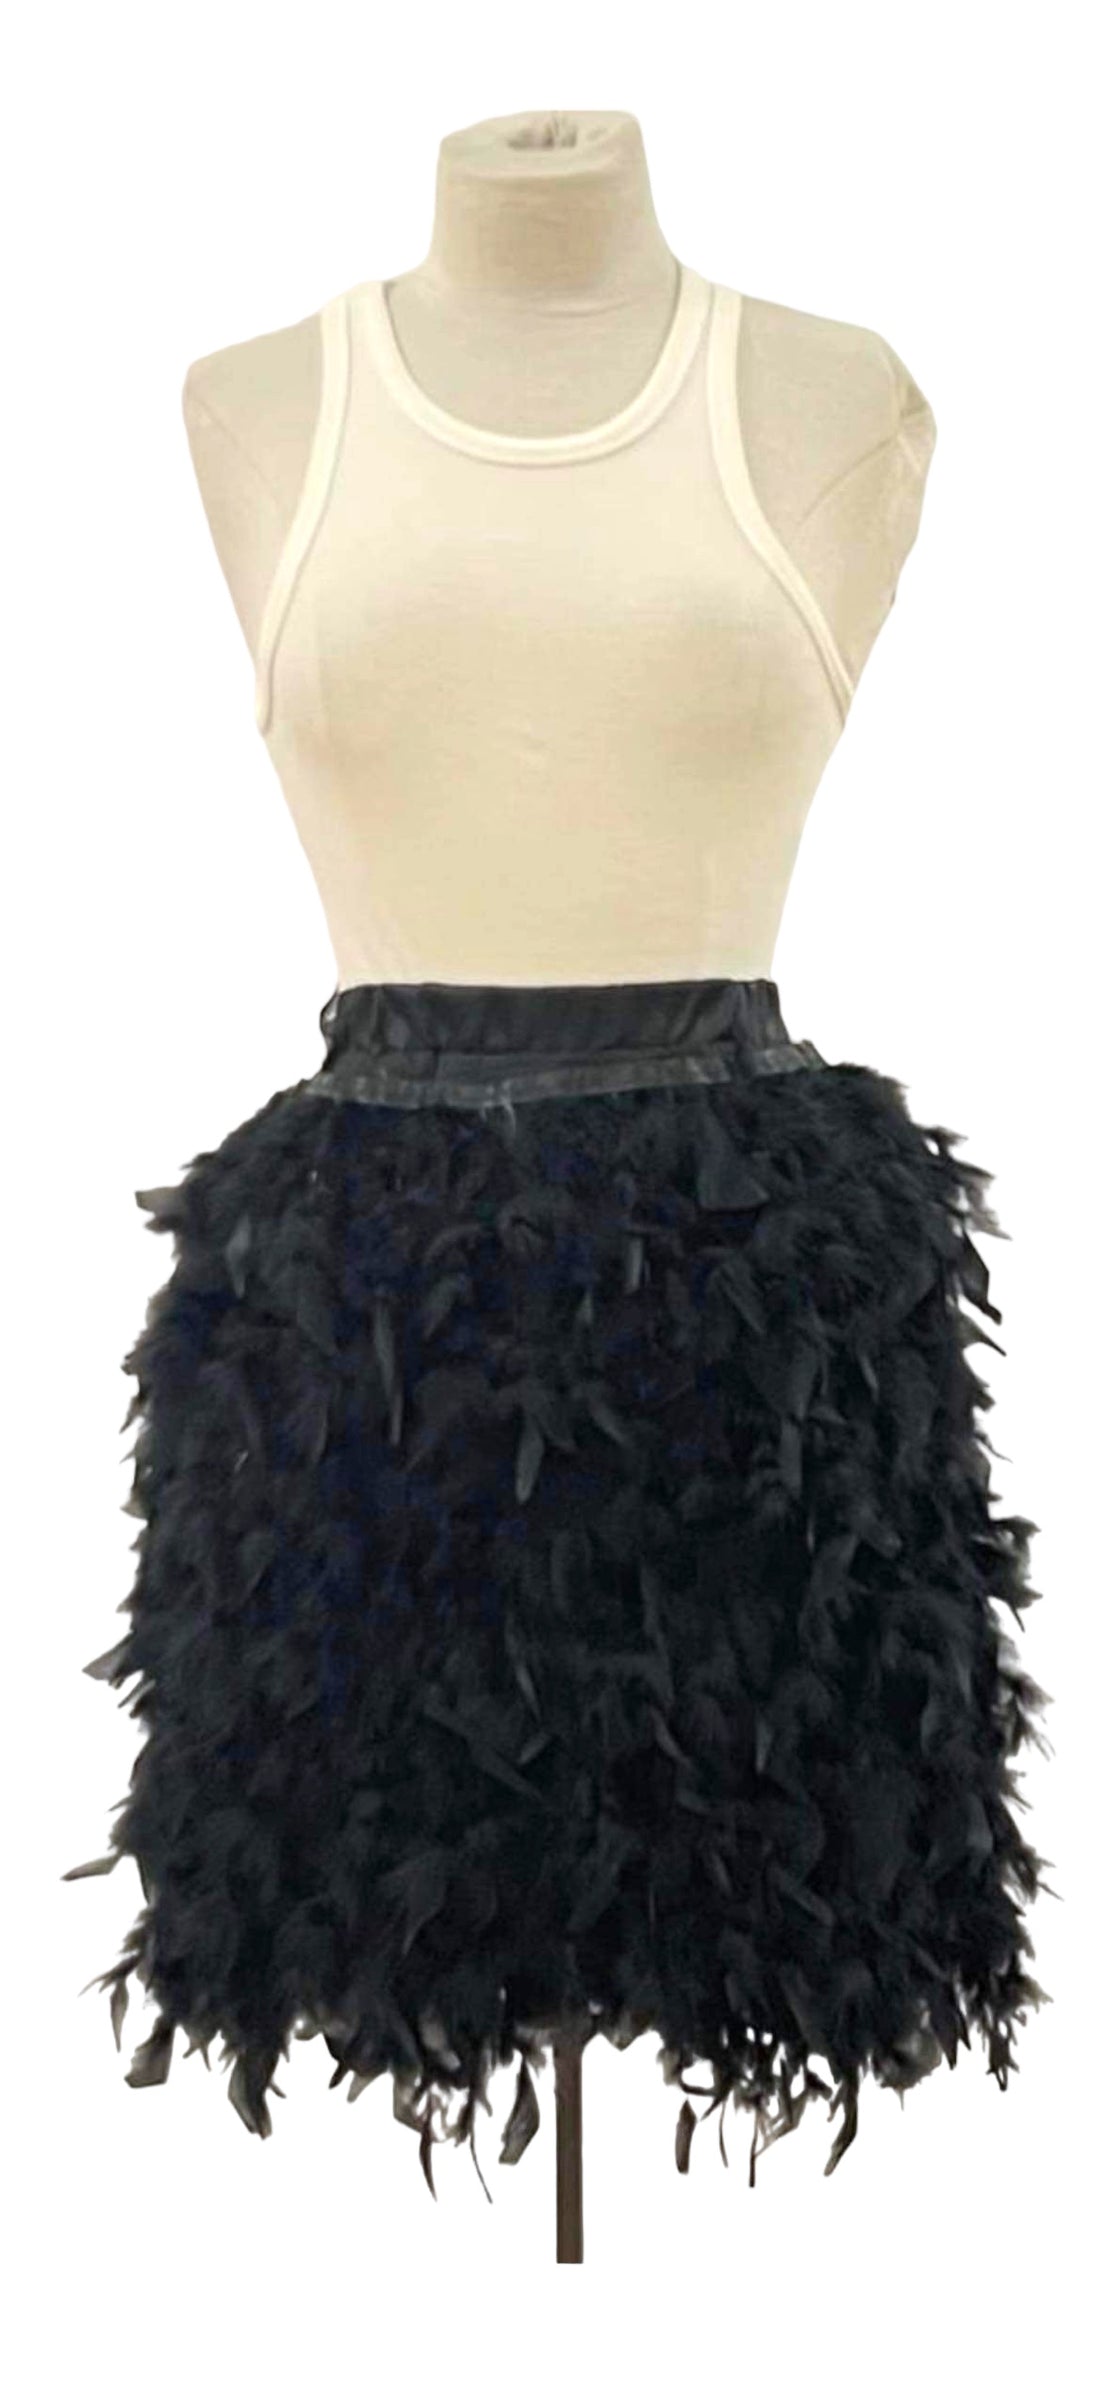 FEATHERS SKIRT